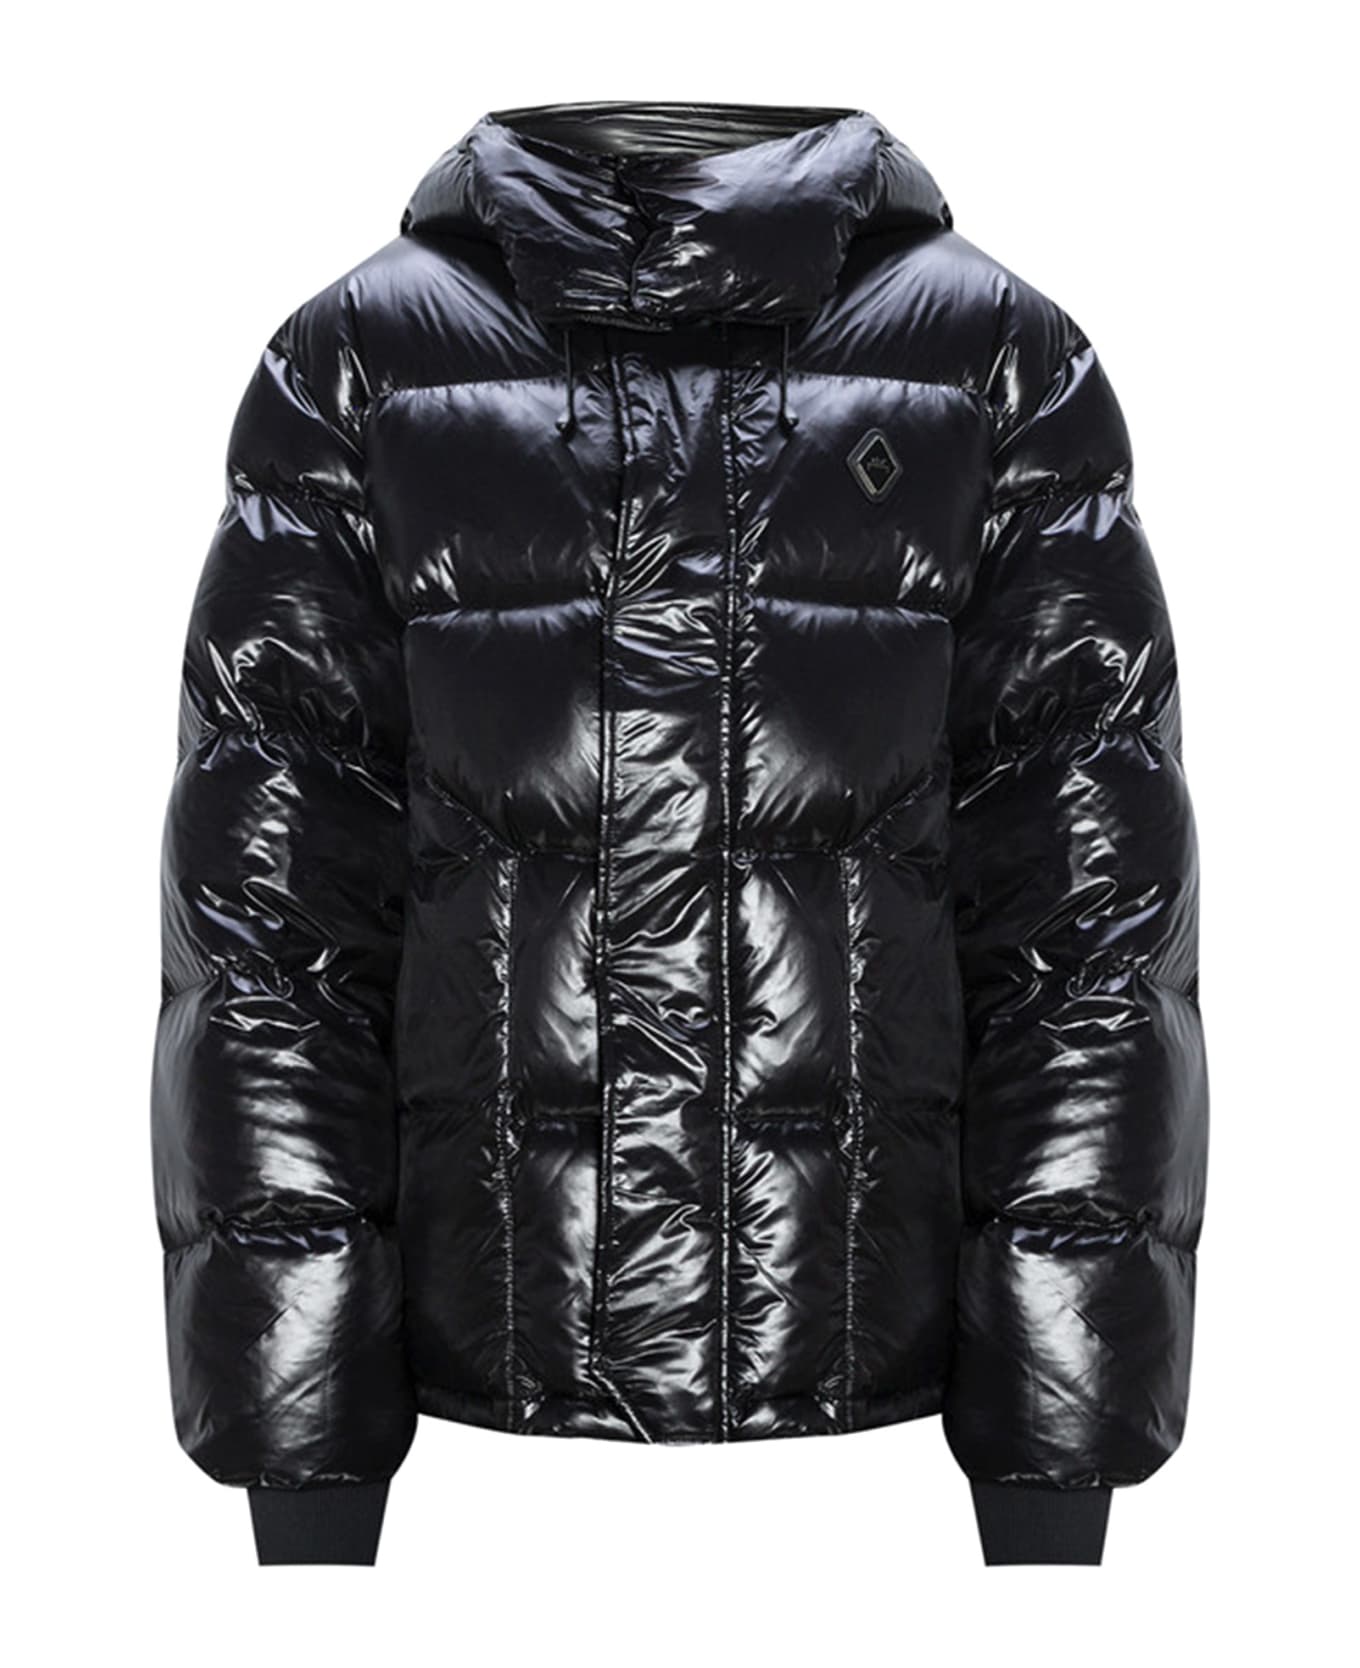 A-COLD-WALL Black Quilted Puffer Jacket - BLACK ダウンジャケット